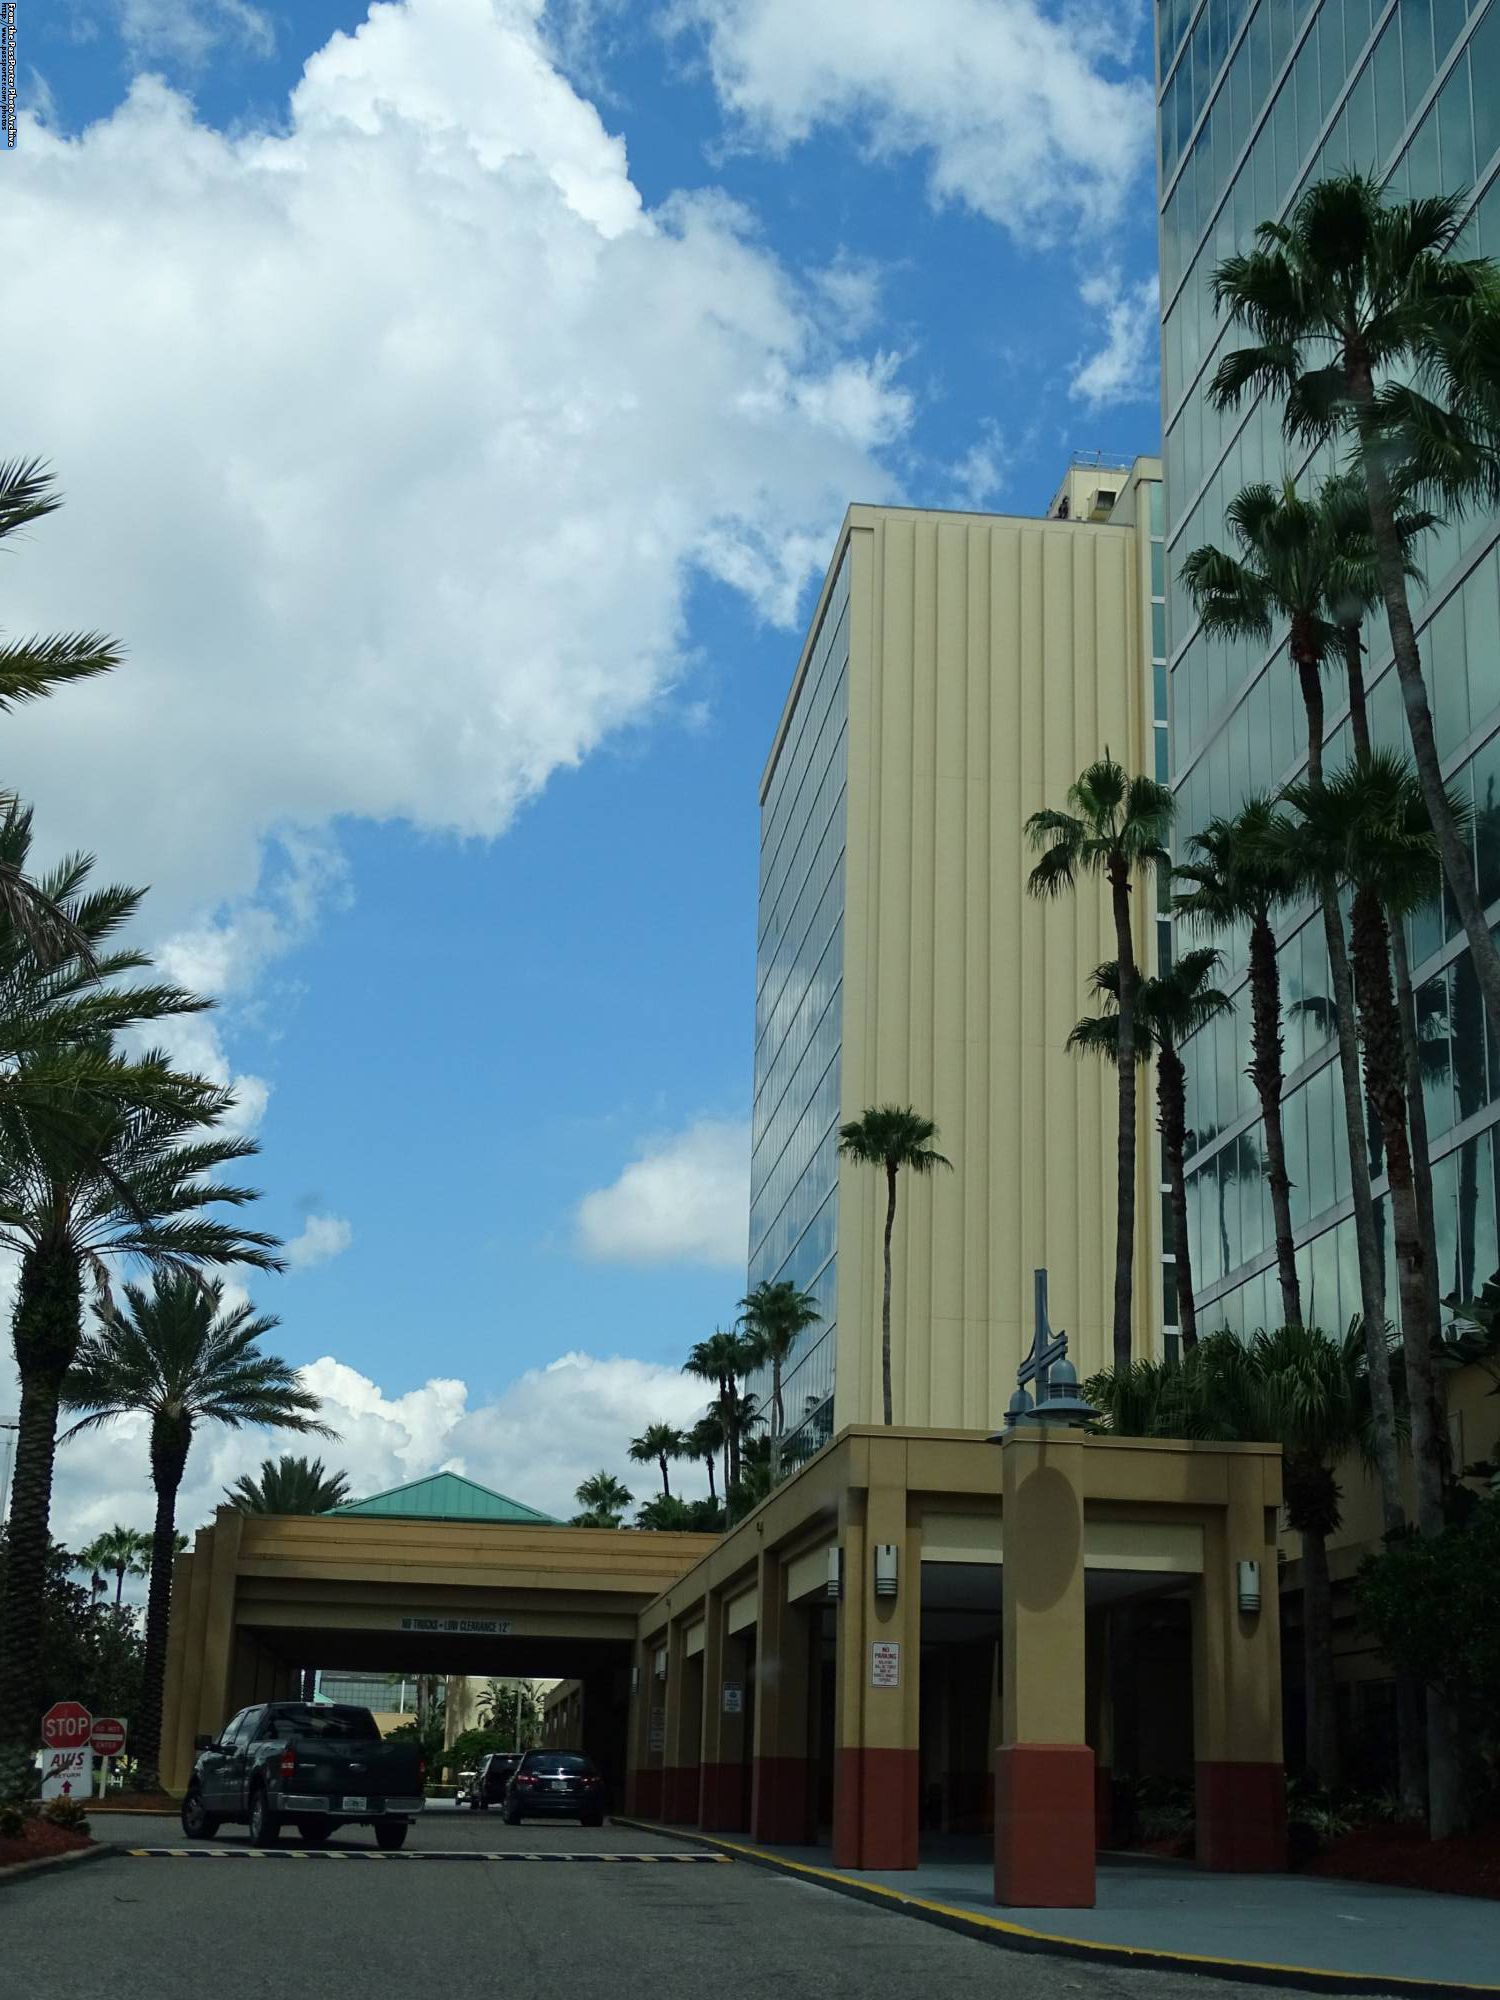 Doubletree at the entrance to Universal